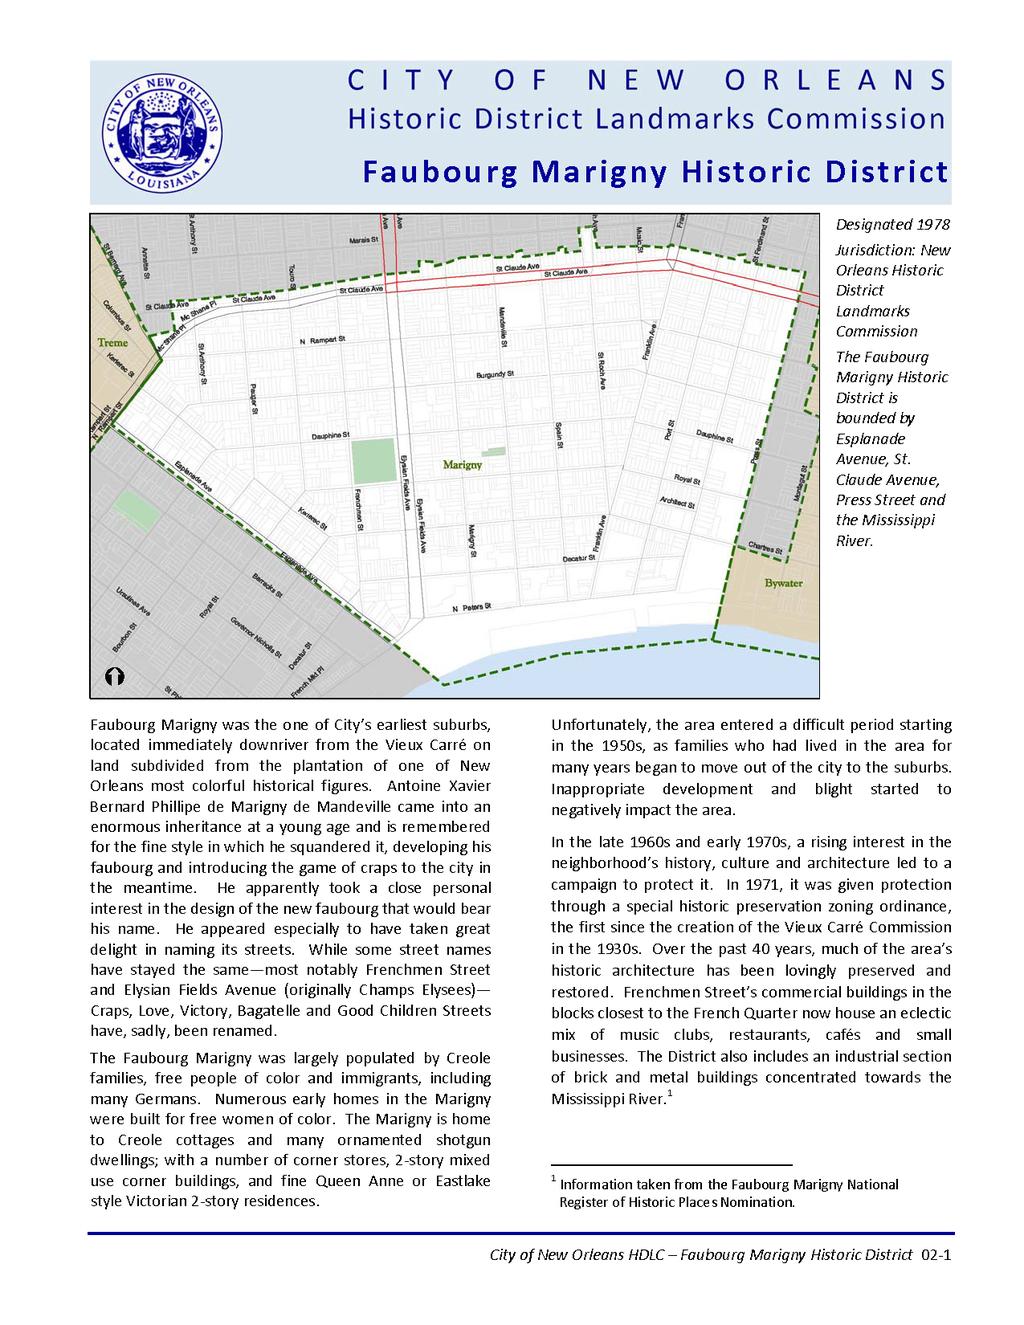 2627-29 Chartres Street, New Orleans, LA - Page 11 NEIGHBORHOOD HISTORIC FAUBOURG MARIGNY The Faubourg Marigny neighborhood of New Orleans has a rich and diverse historic since its construction in